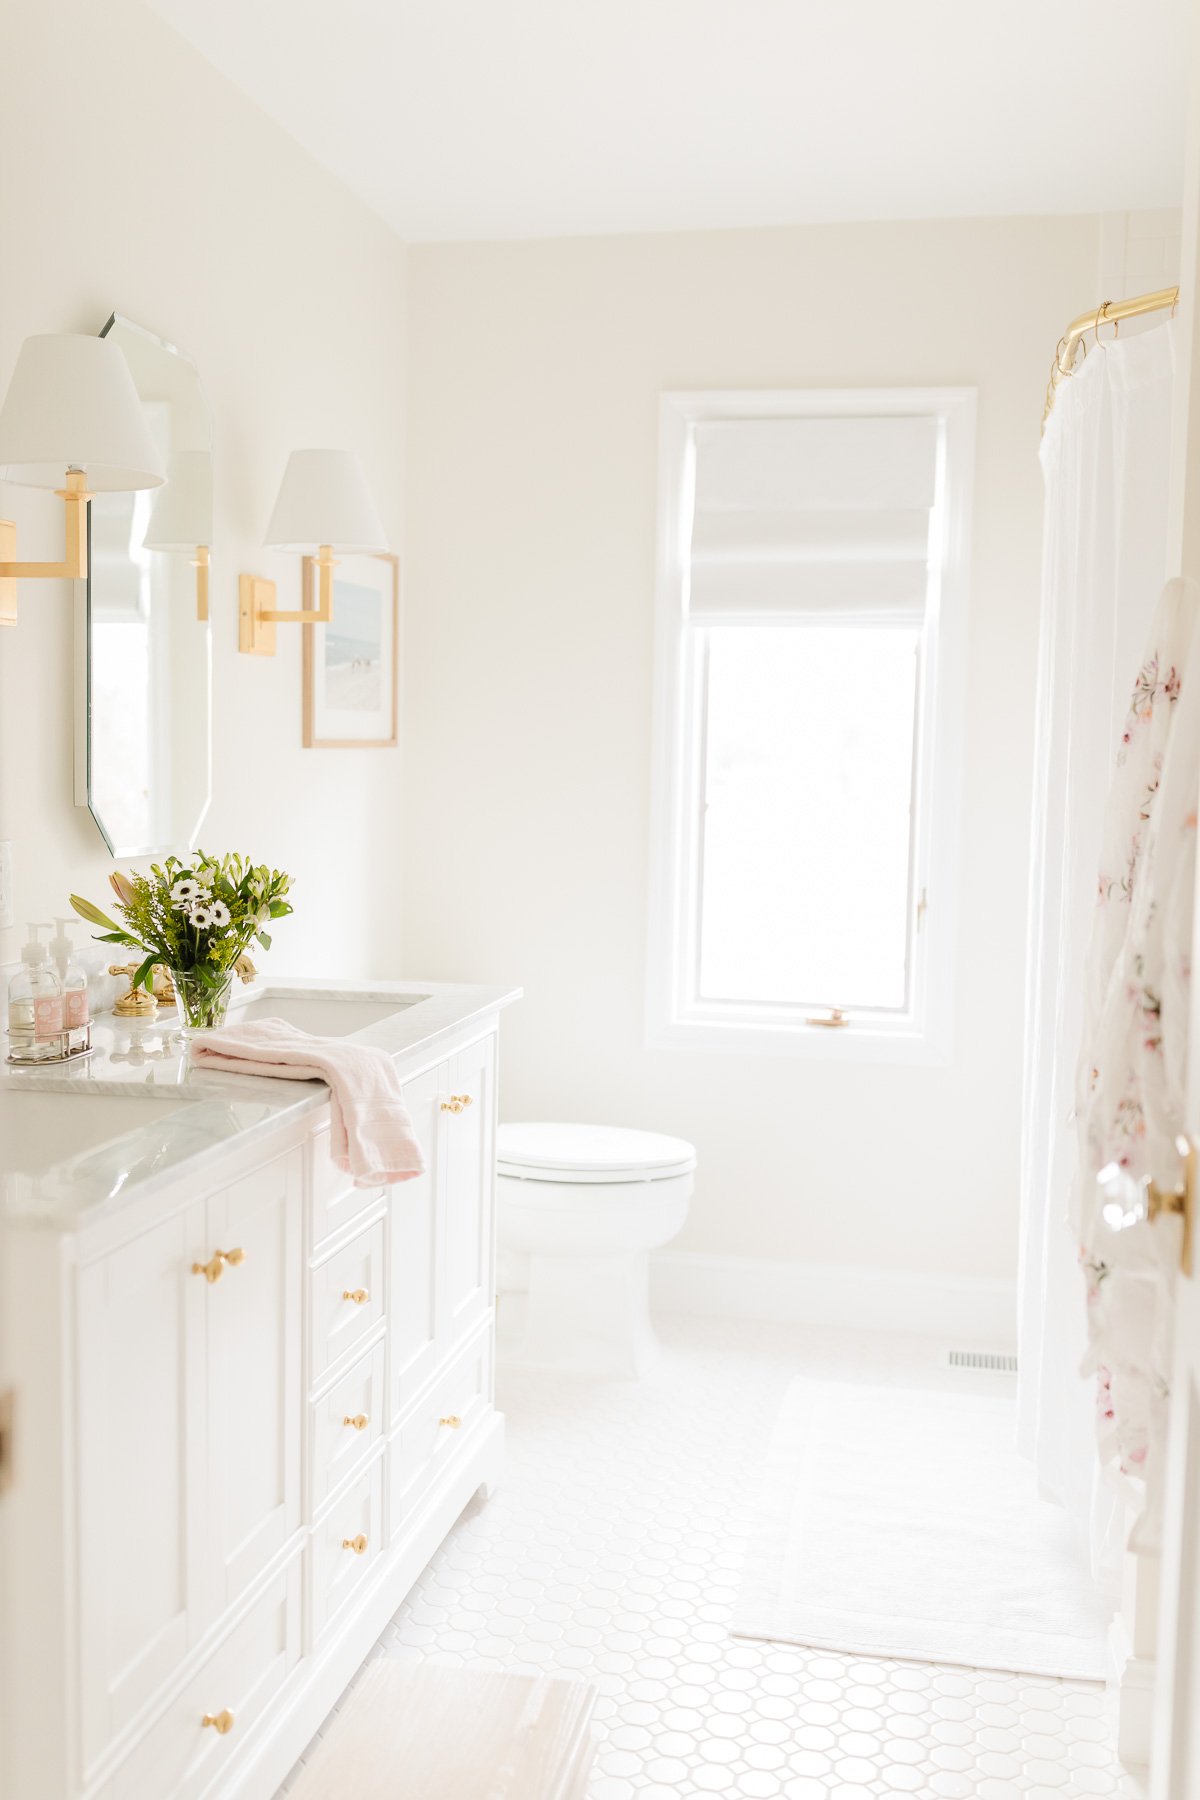 bathroom painted in white dove